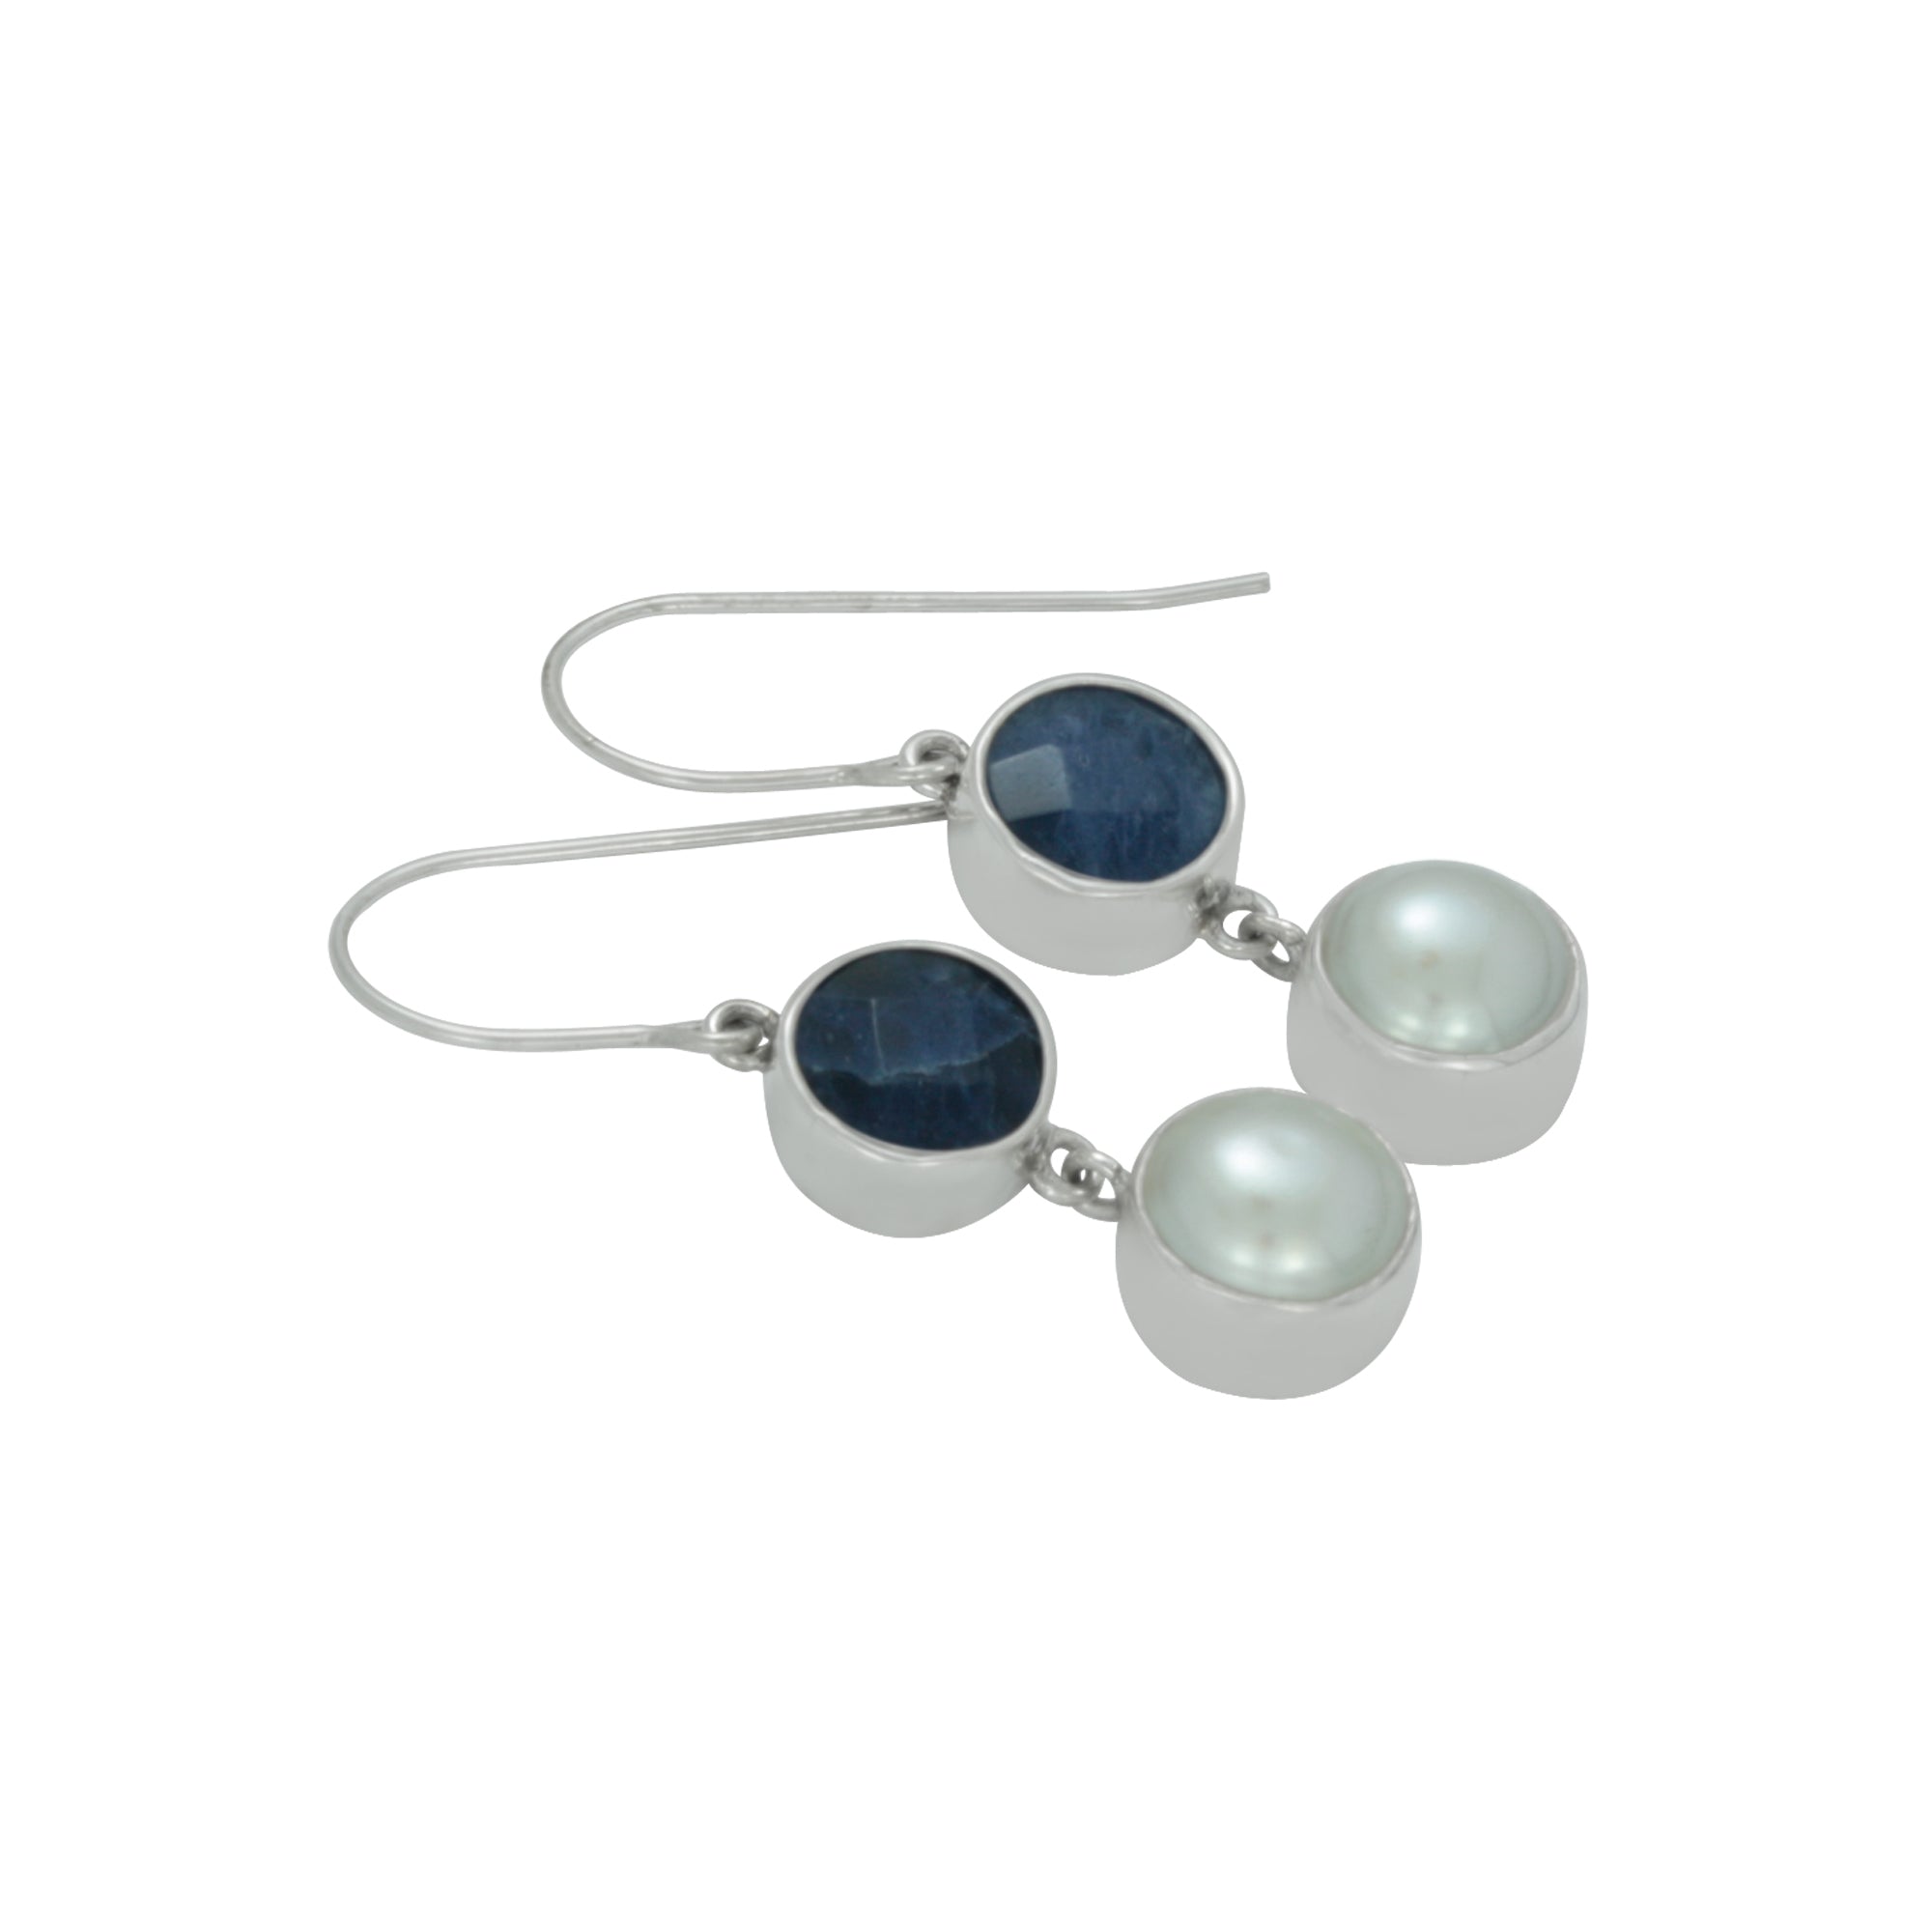 Experience Everyday Elegance with this Sodolite and Pearl drop Earring!